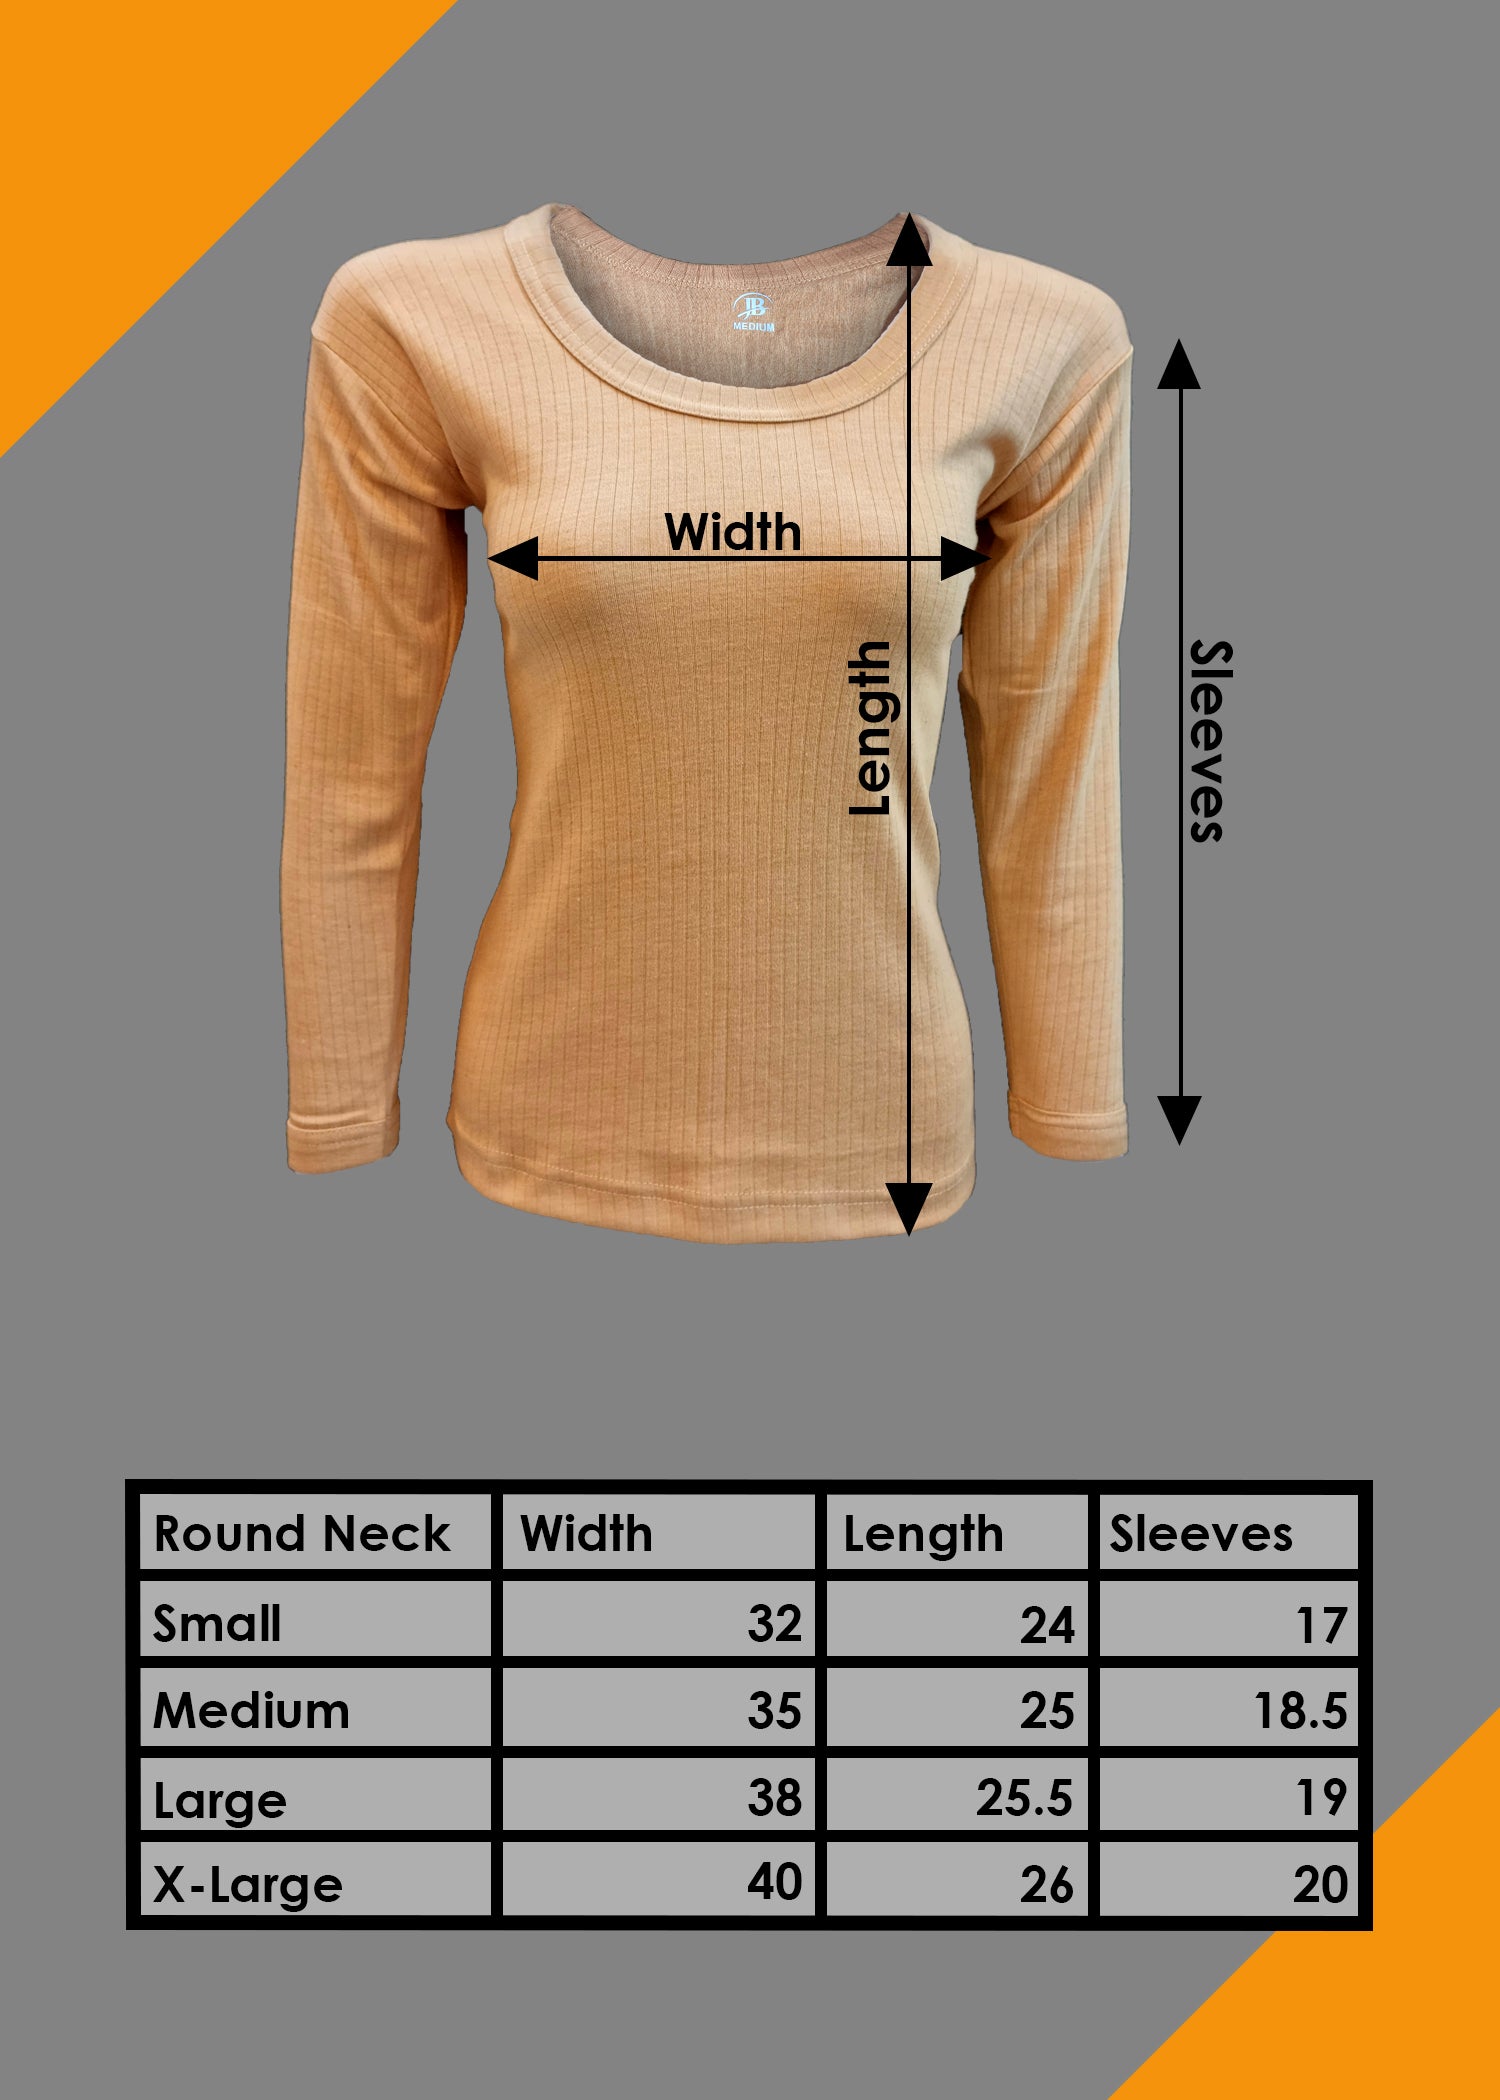 Super Comfy Combed Cotton Thermal Suit for Men and Women